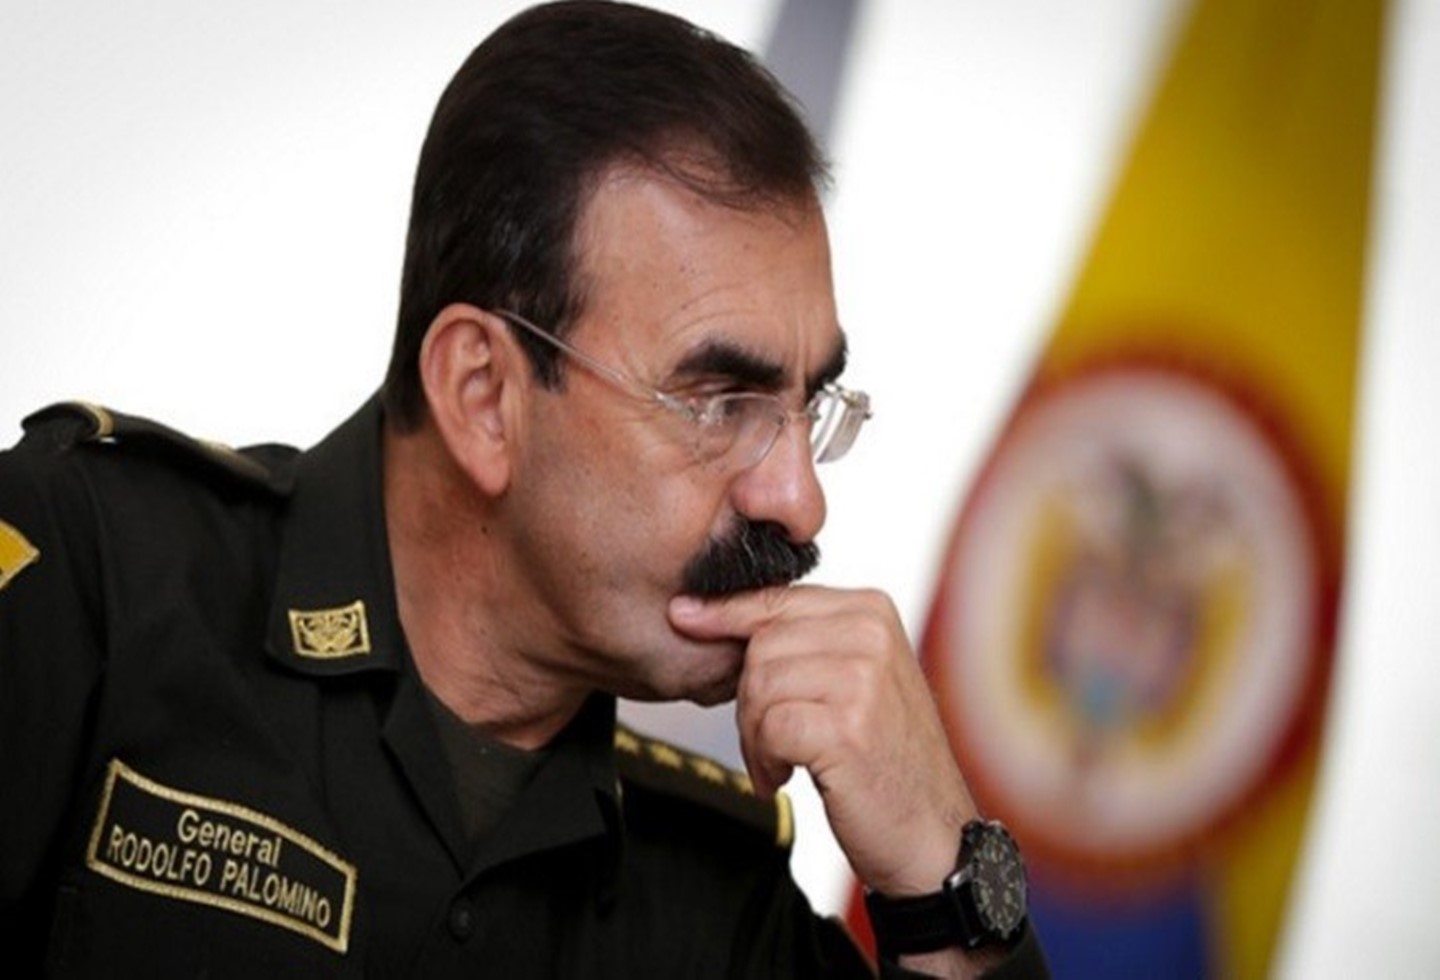 General (r) Palomino called "useful idiots of drug trafficking" to cop killers